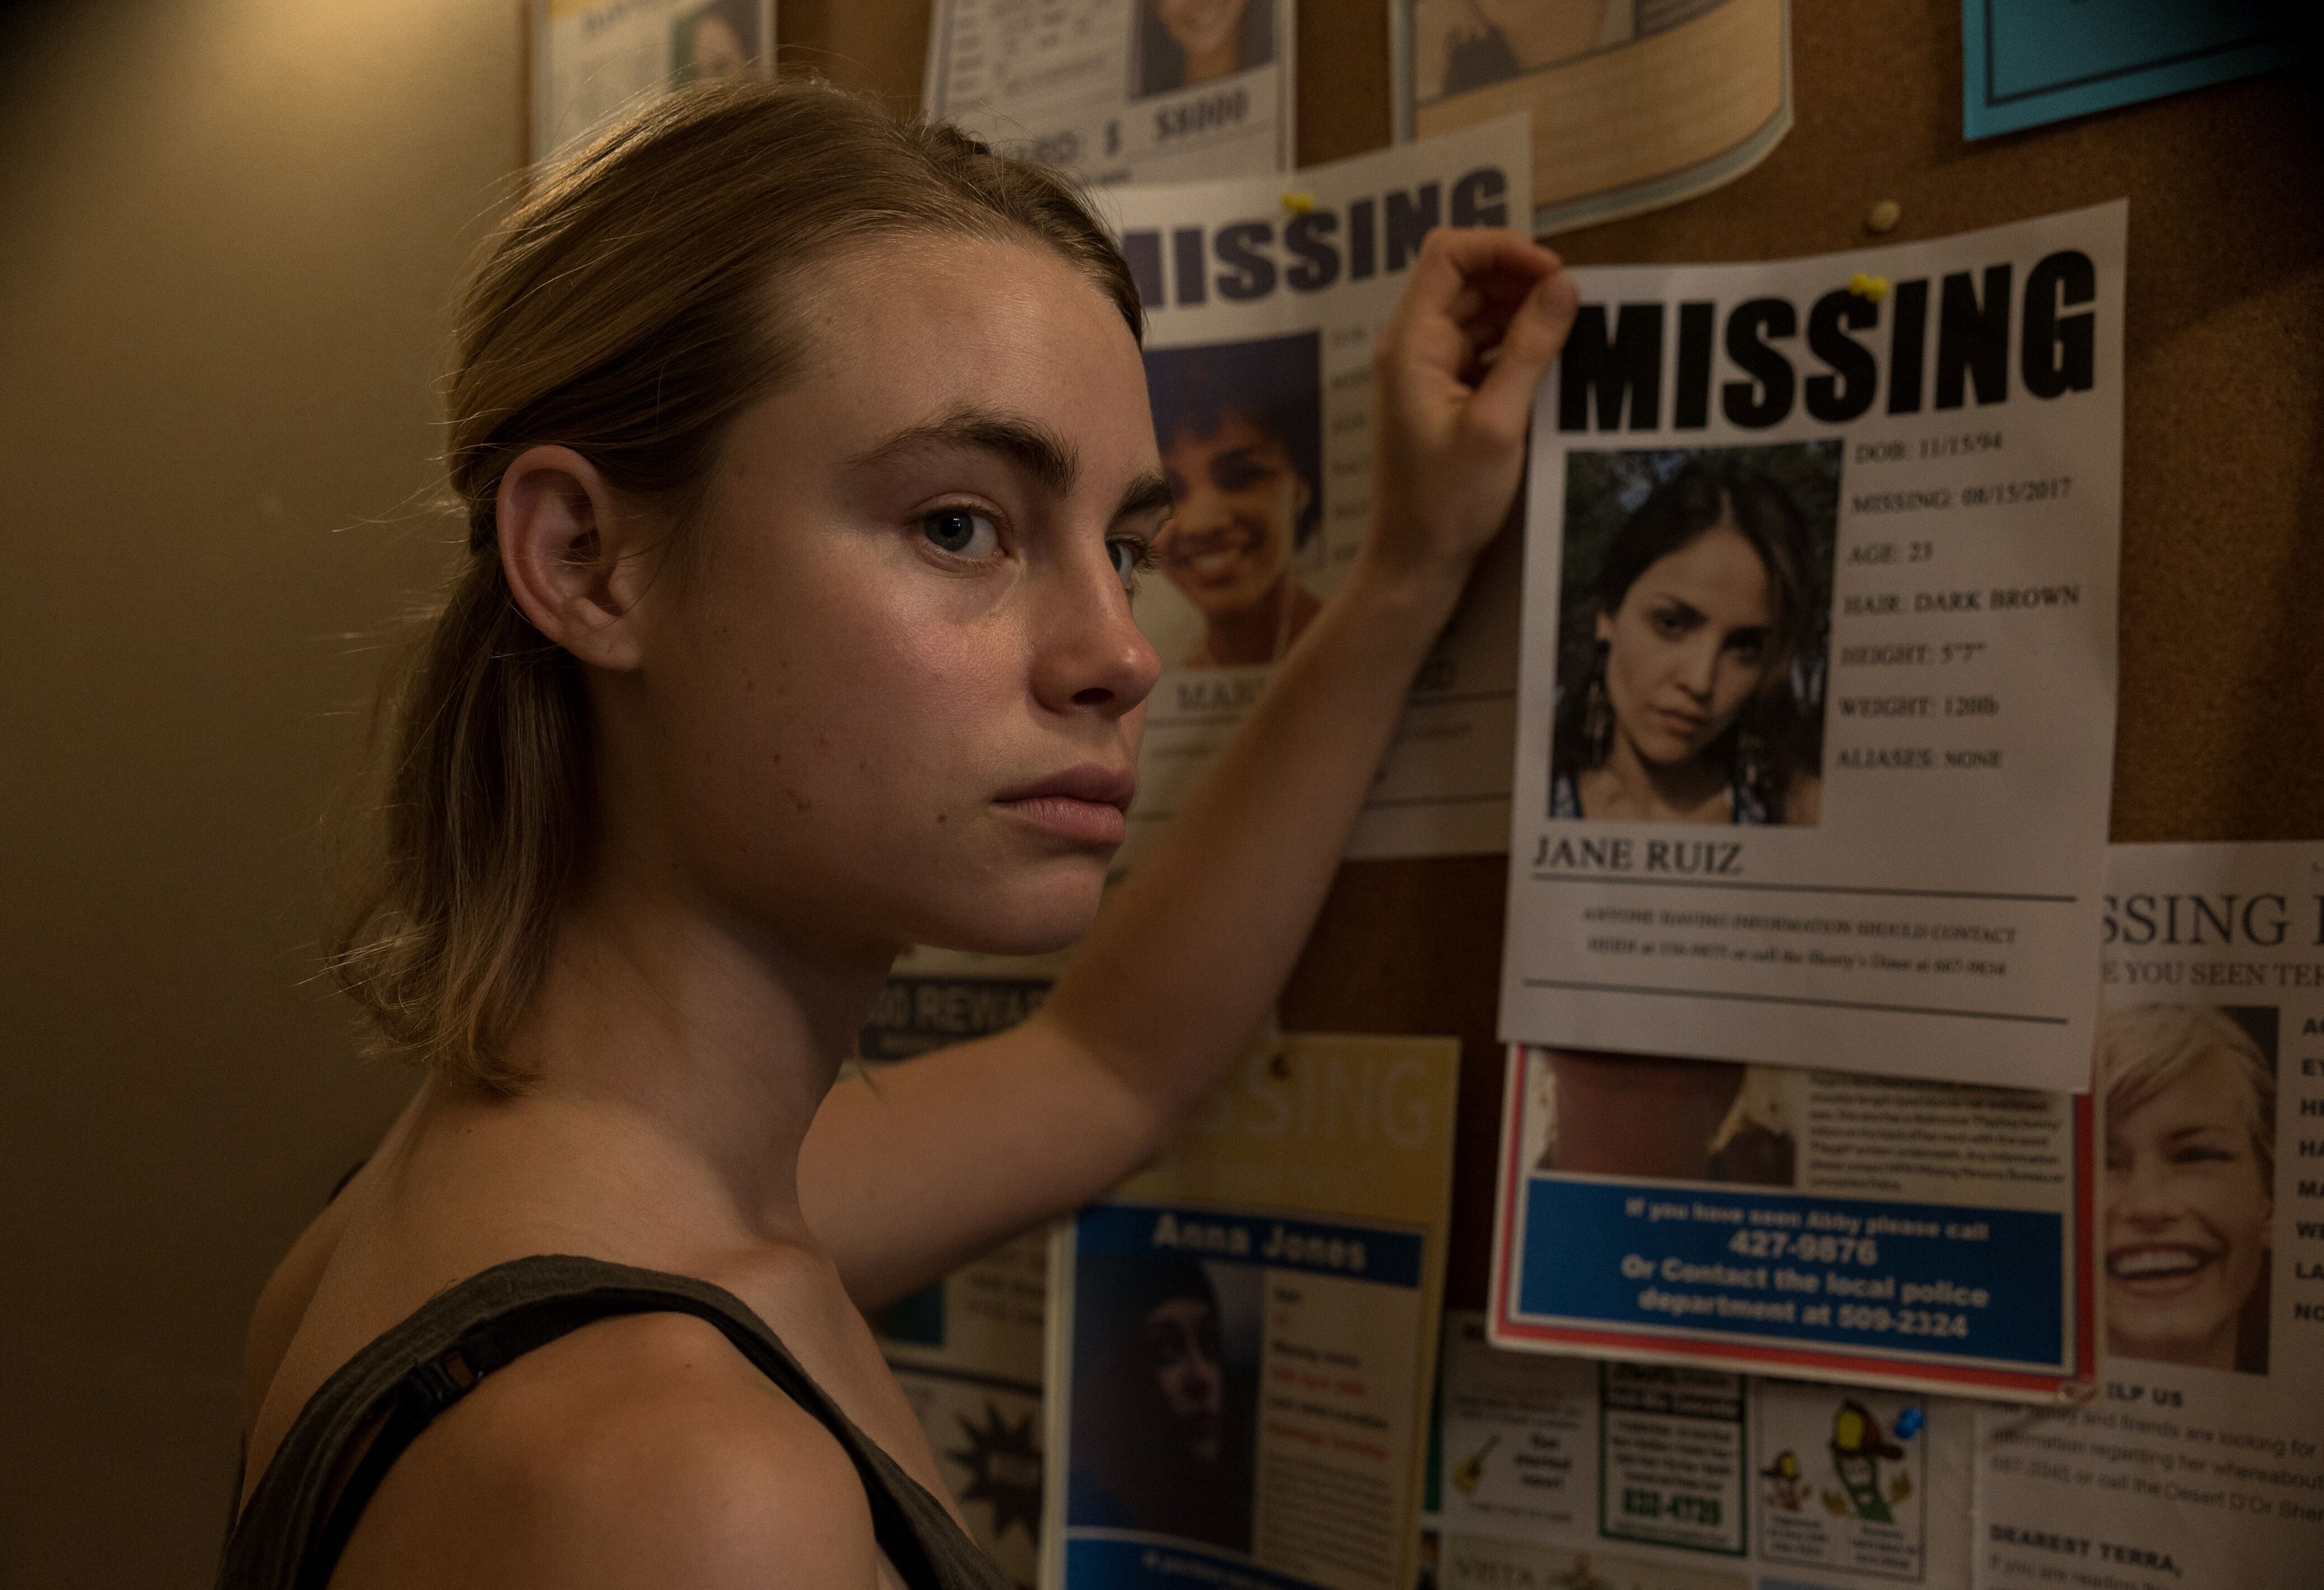 She's Missing 2019 Movie - Film Review